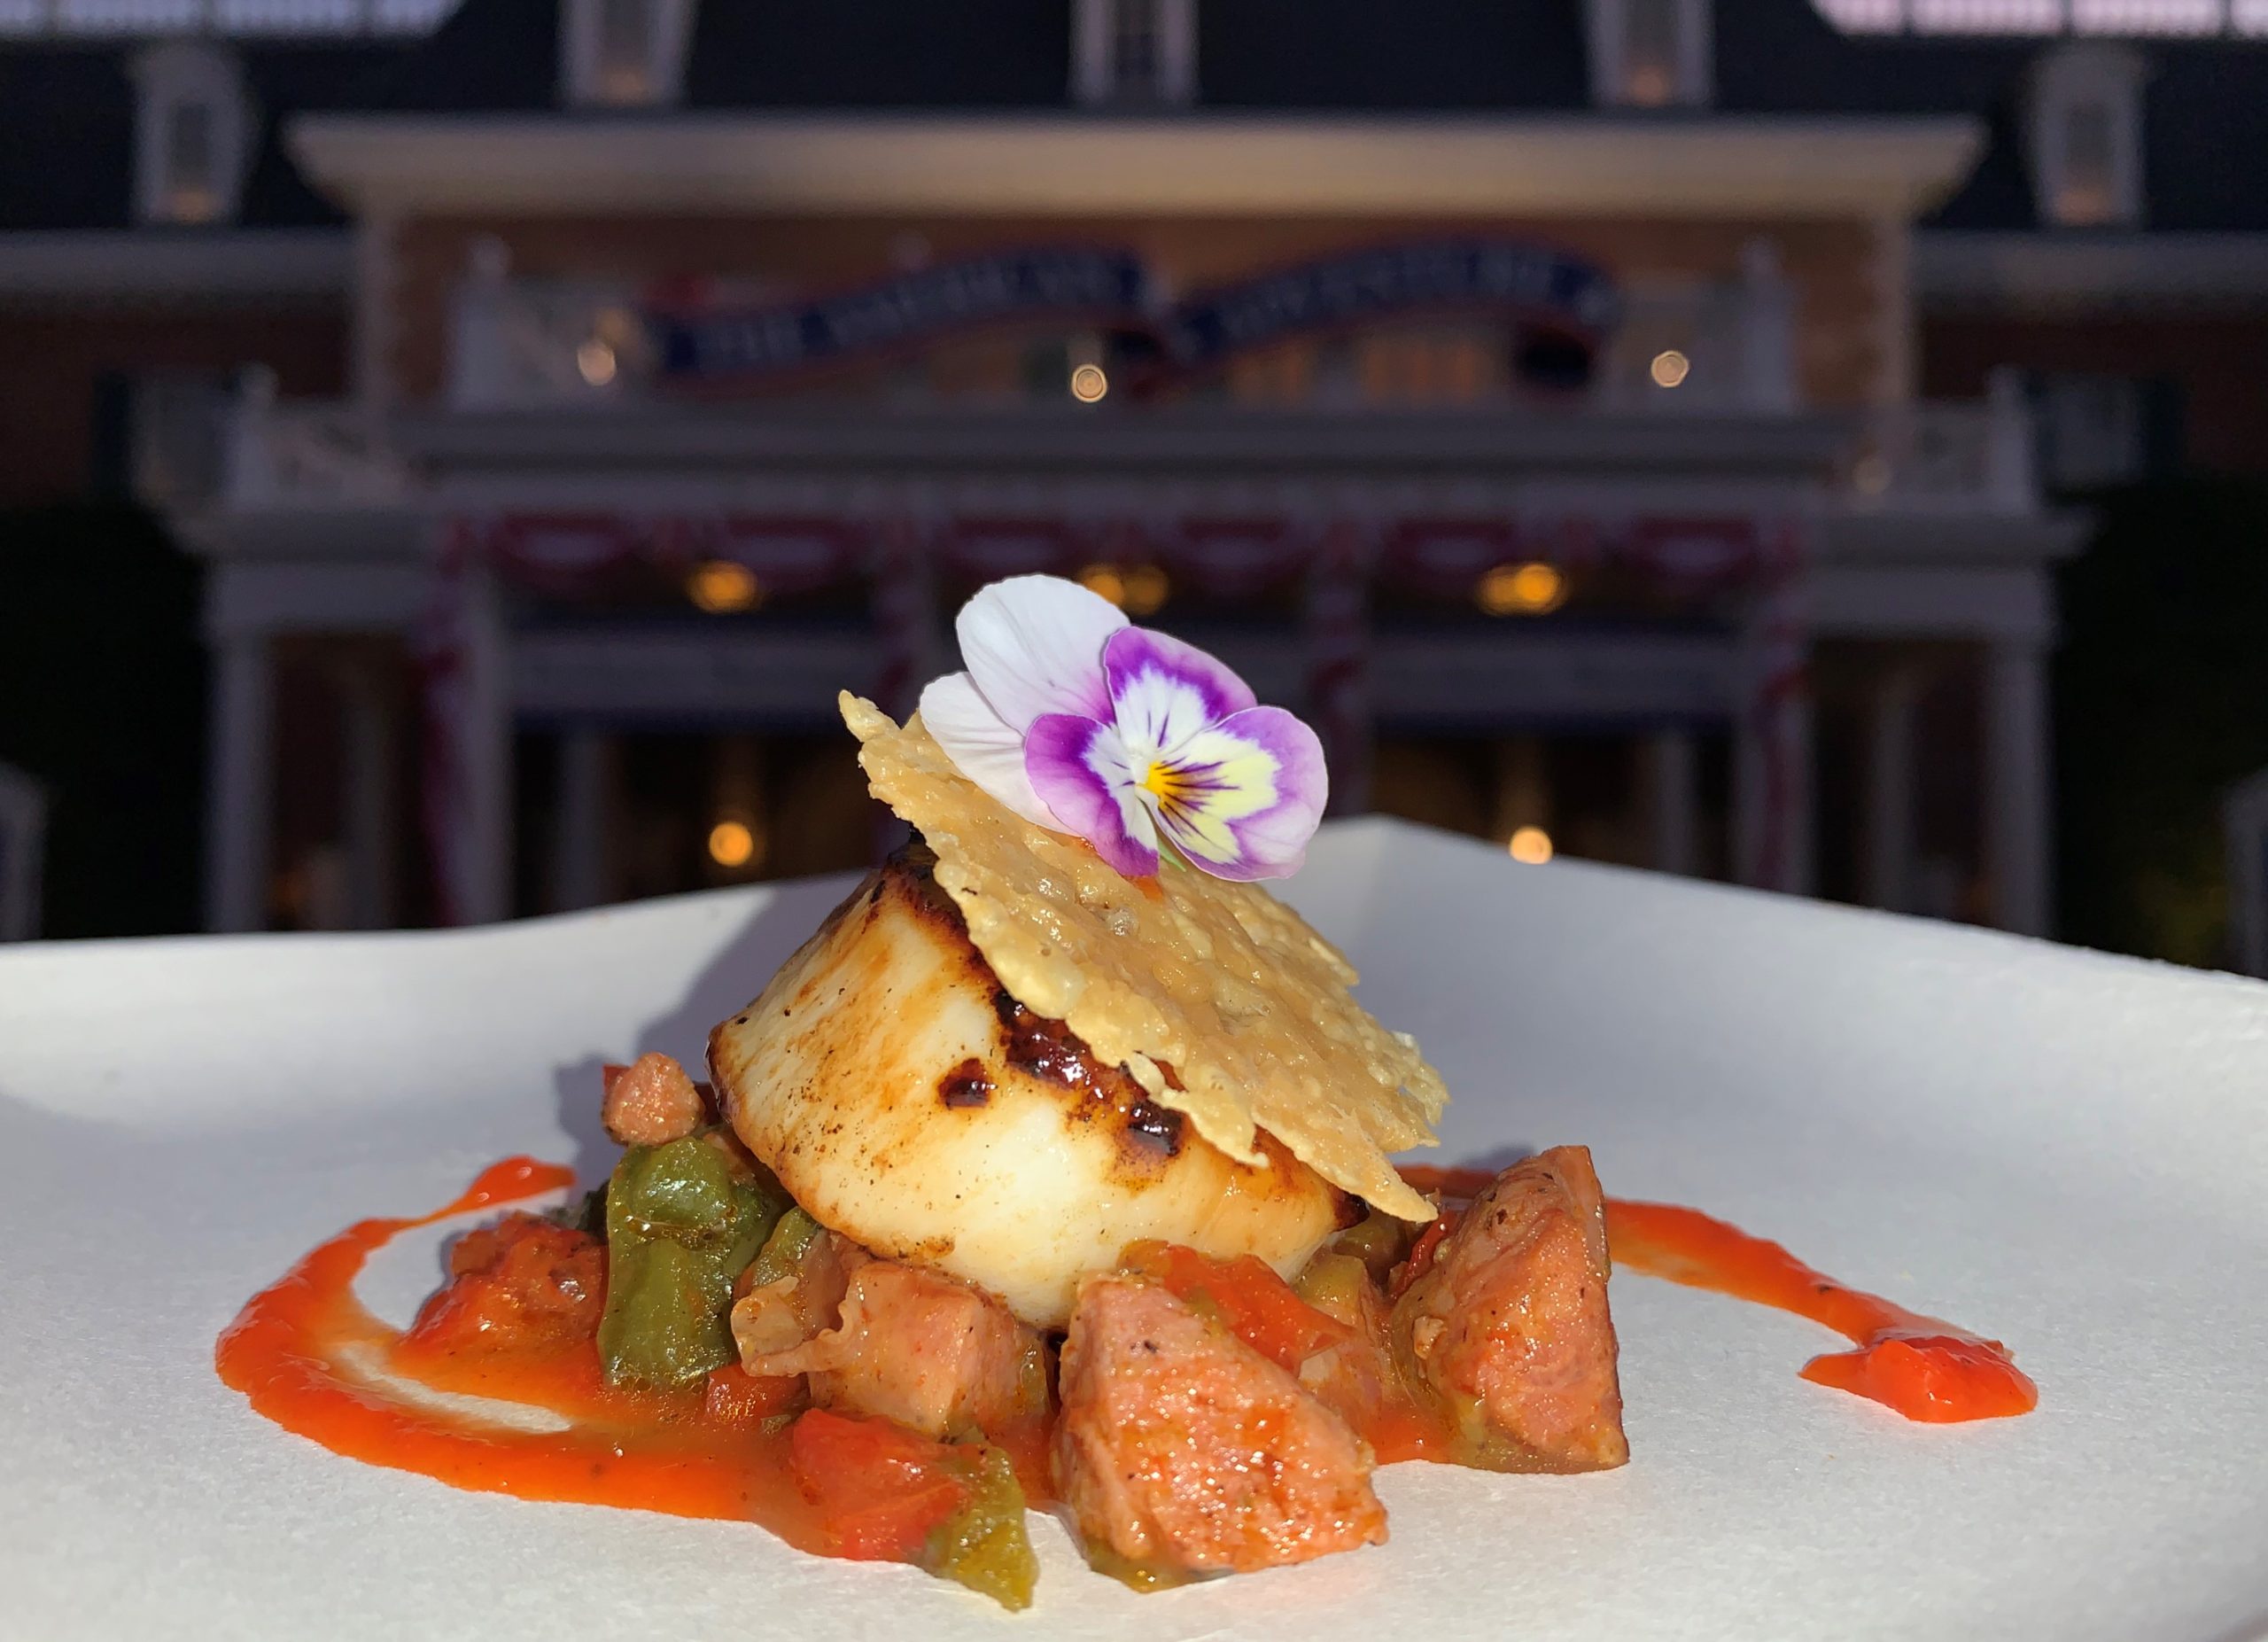 Pan-Seared Scallop with Chorizo, Roasted Red Pepper Coulis and a Parmesan Crisp from The Artist’s Table in America